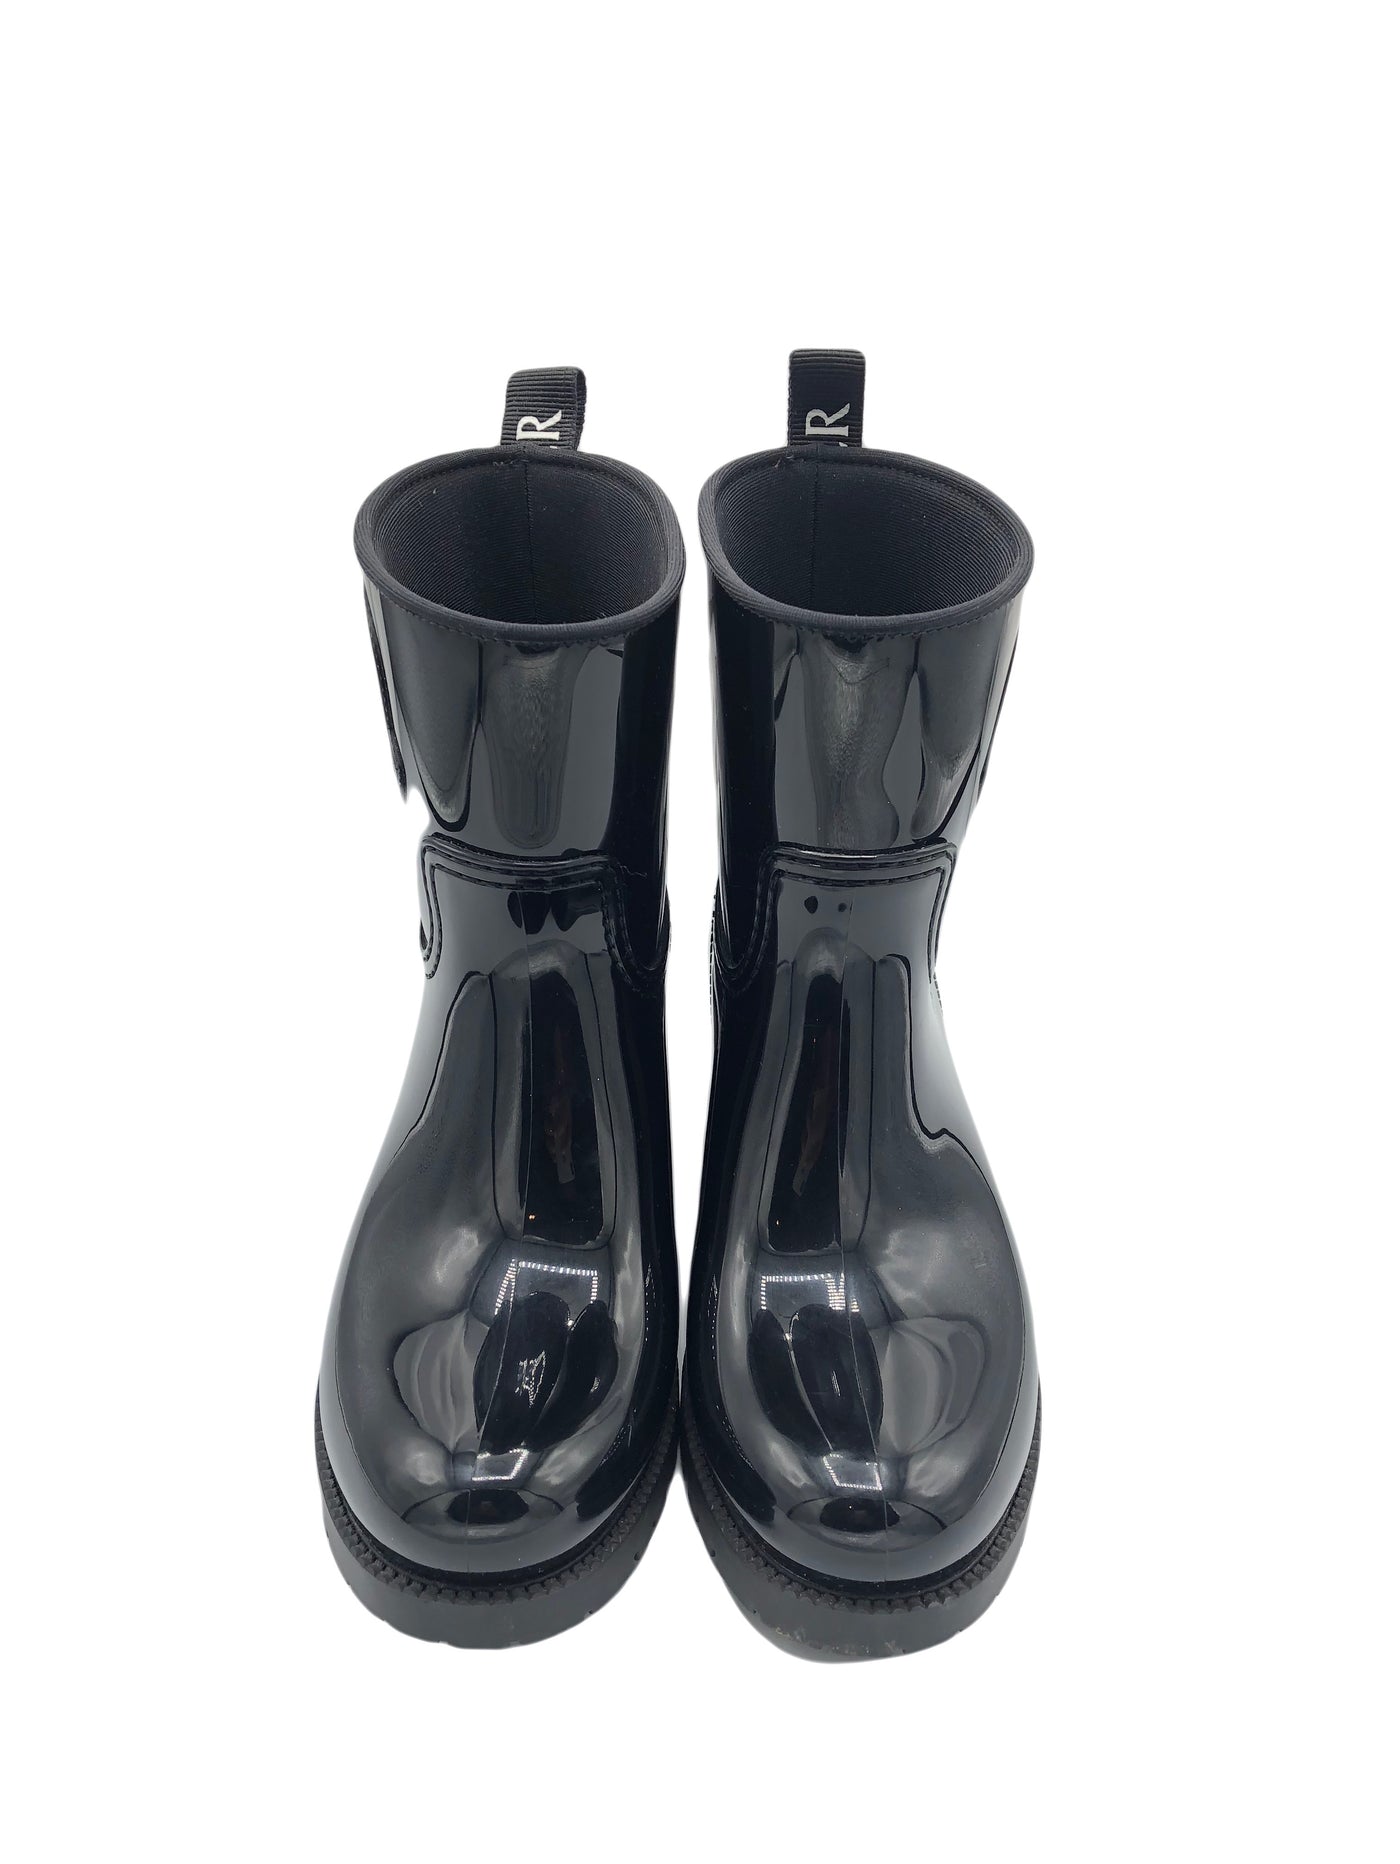 MONCLER rubber boots size 36 Never Worn RRP: £365